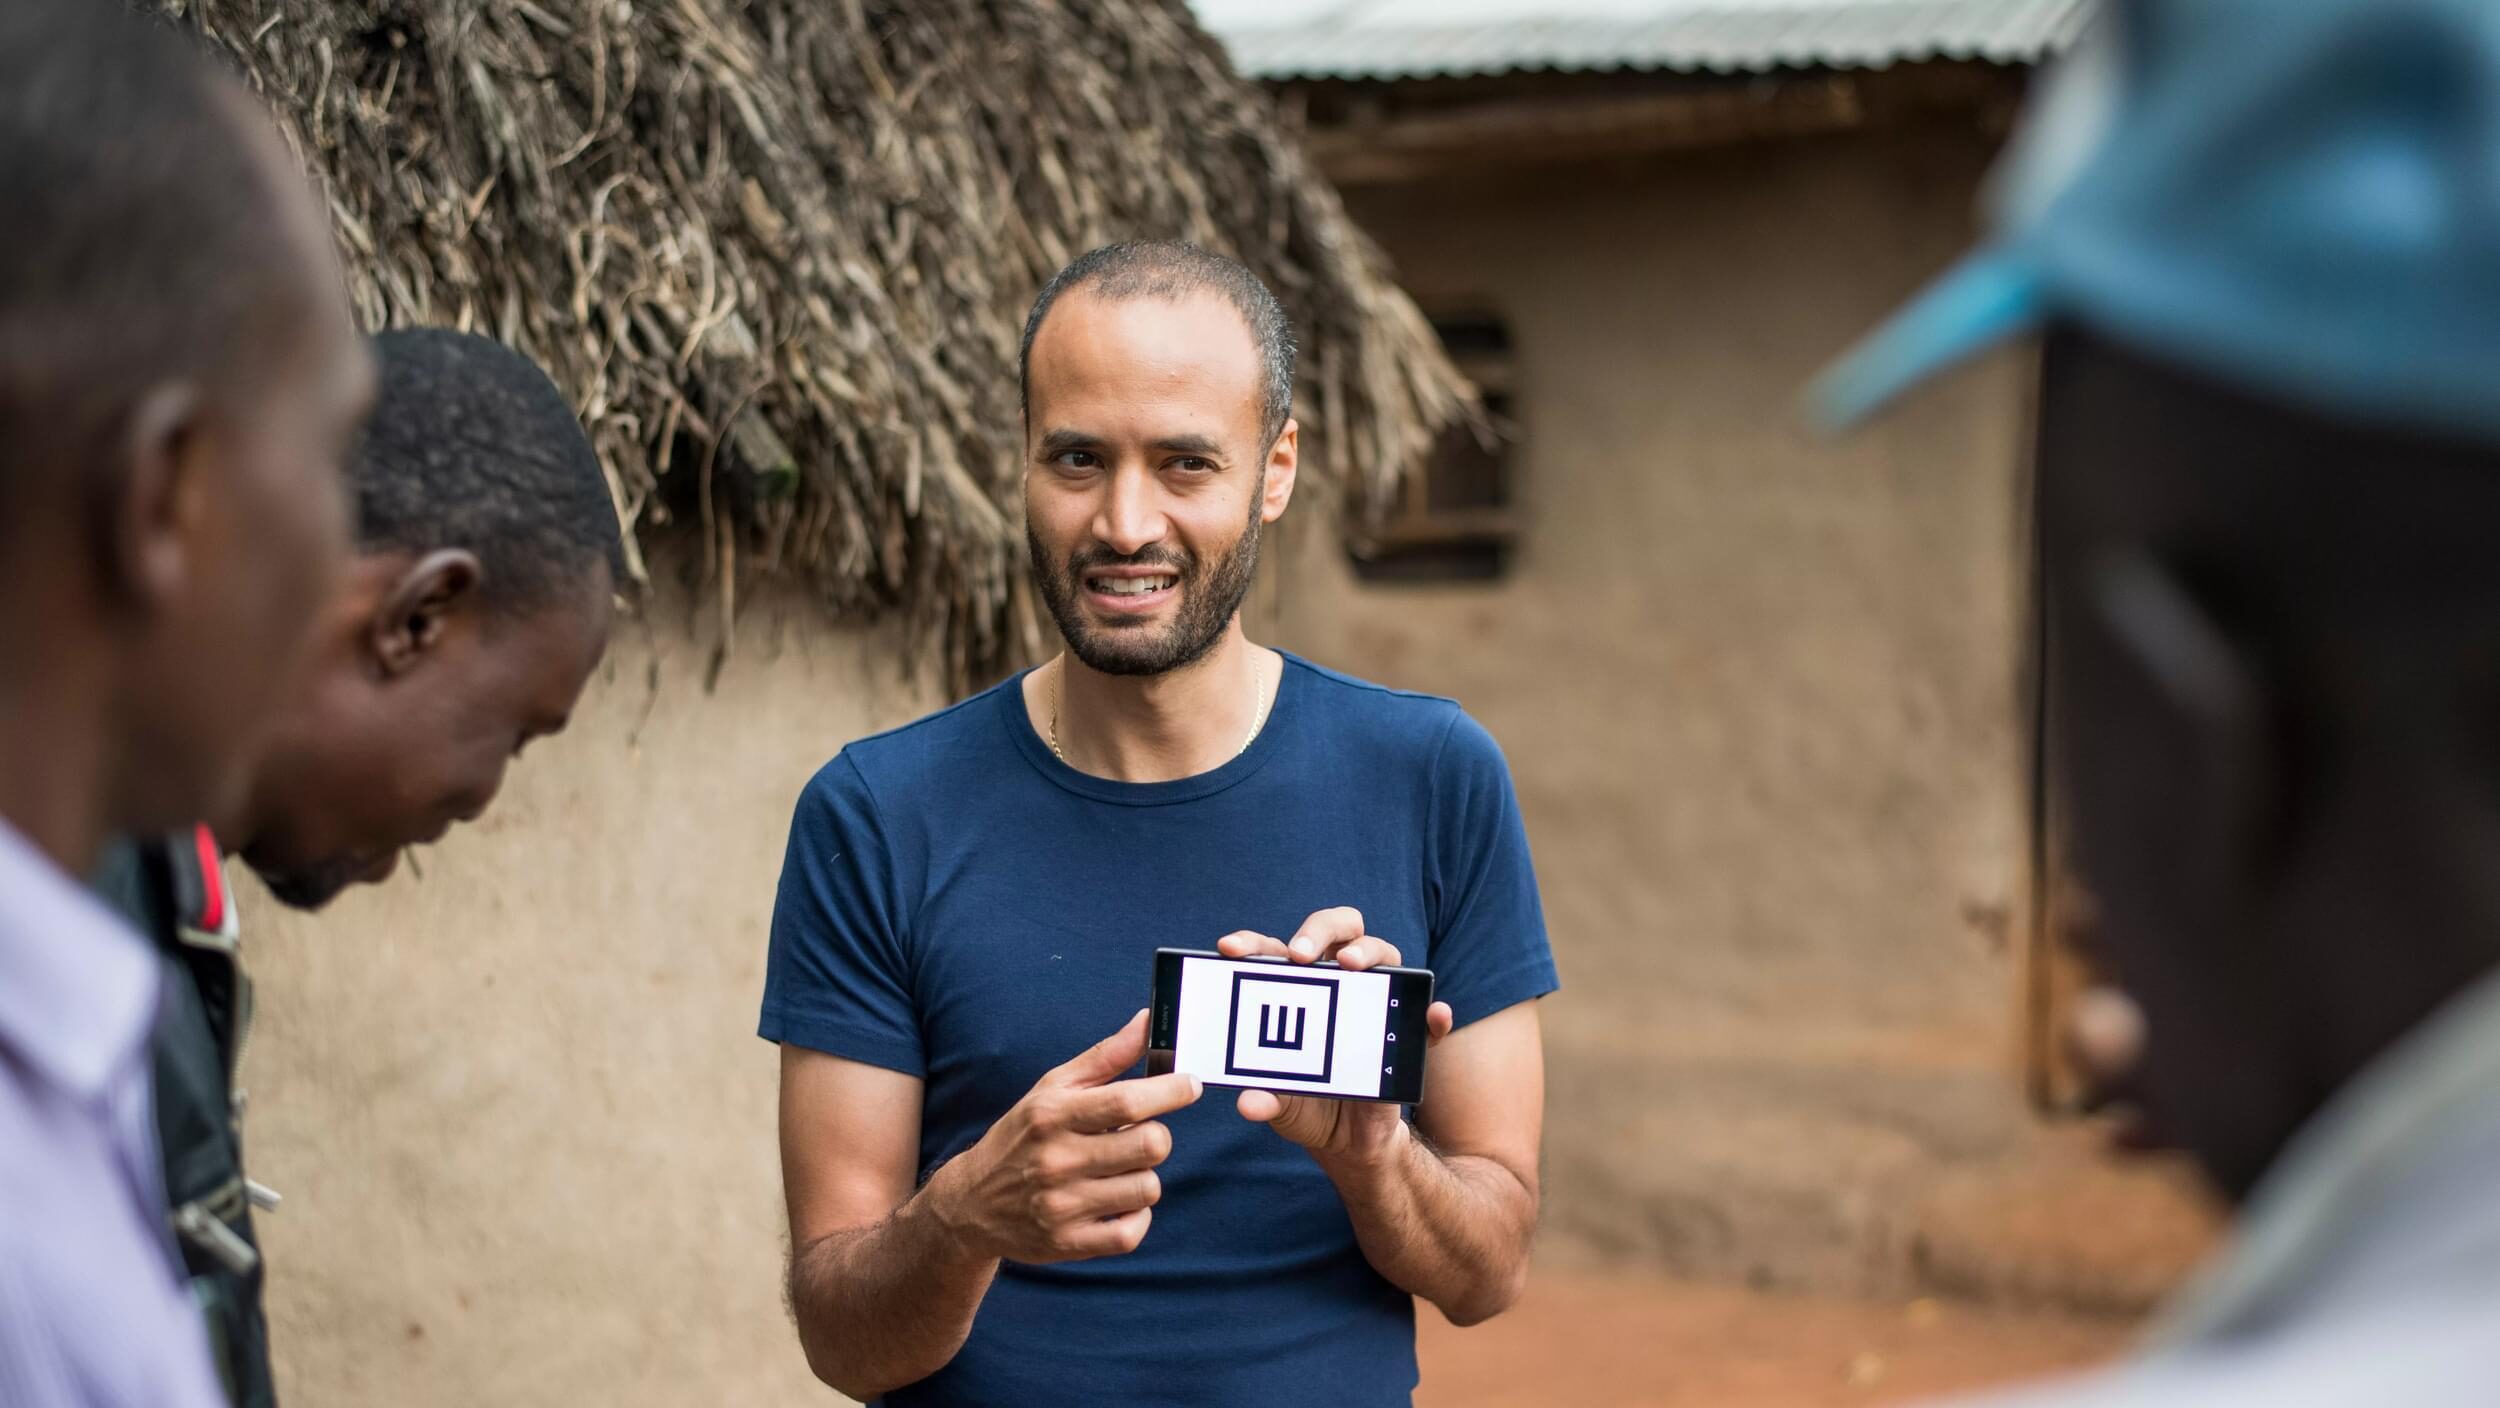 Peek CEO, Andrew Bastawrous, holds up a phone displaying the Peek app vision test with 'tumbling E'. He shows this to a group of men in rural Kenya.